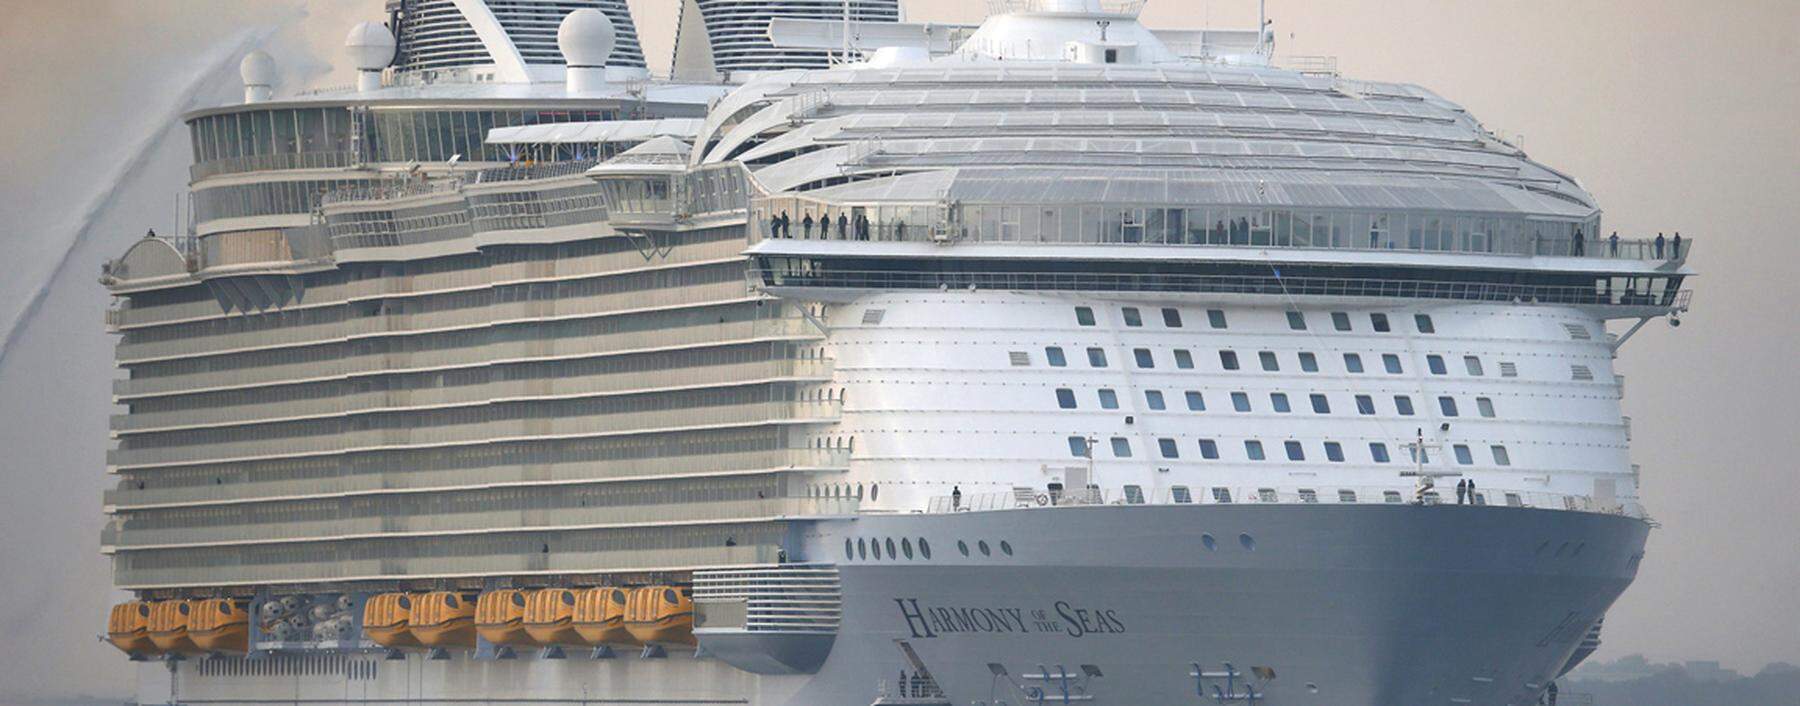 The worlds largest cruise ship, the 361 metres long, Harmony of the Seas, arrives in port for the first time, in Southampton